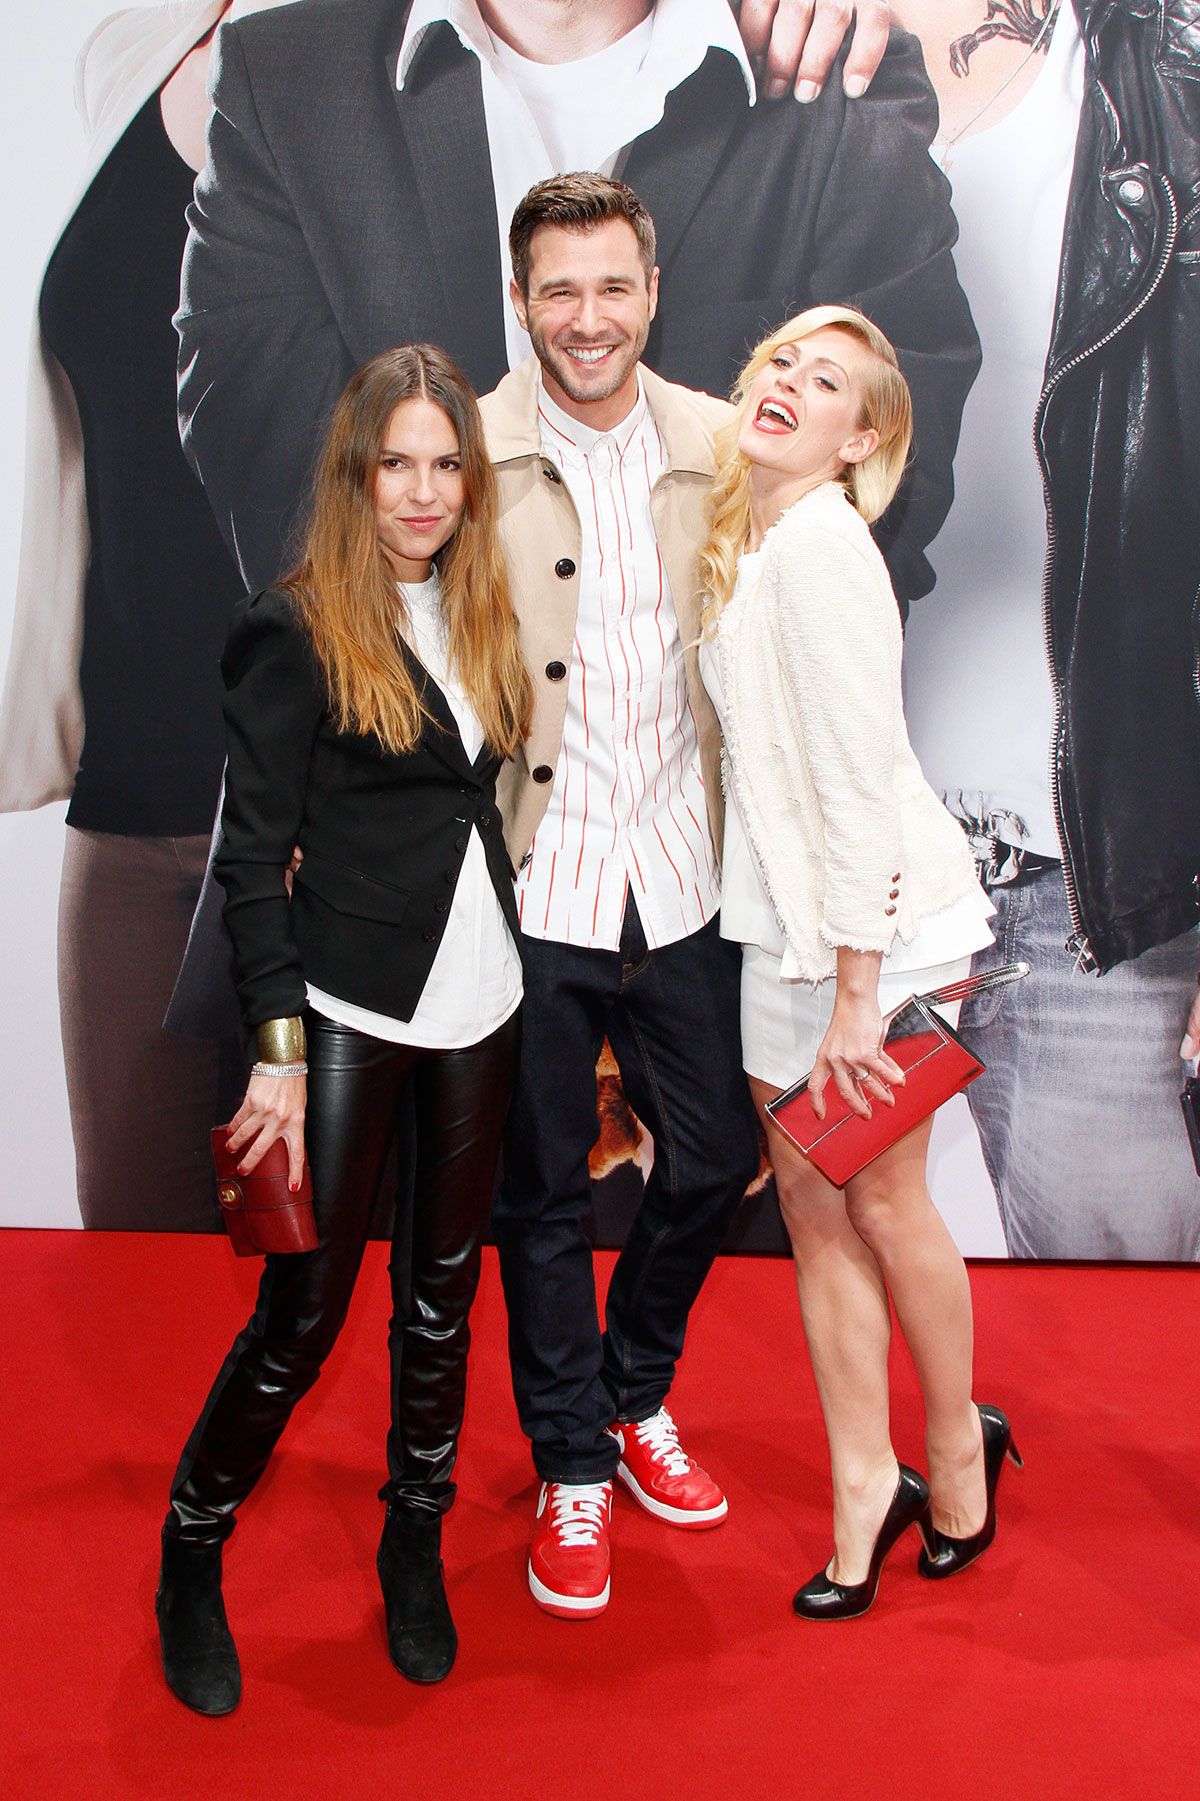 German celebs attend the premiere of the film Nicht mein Tag